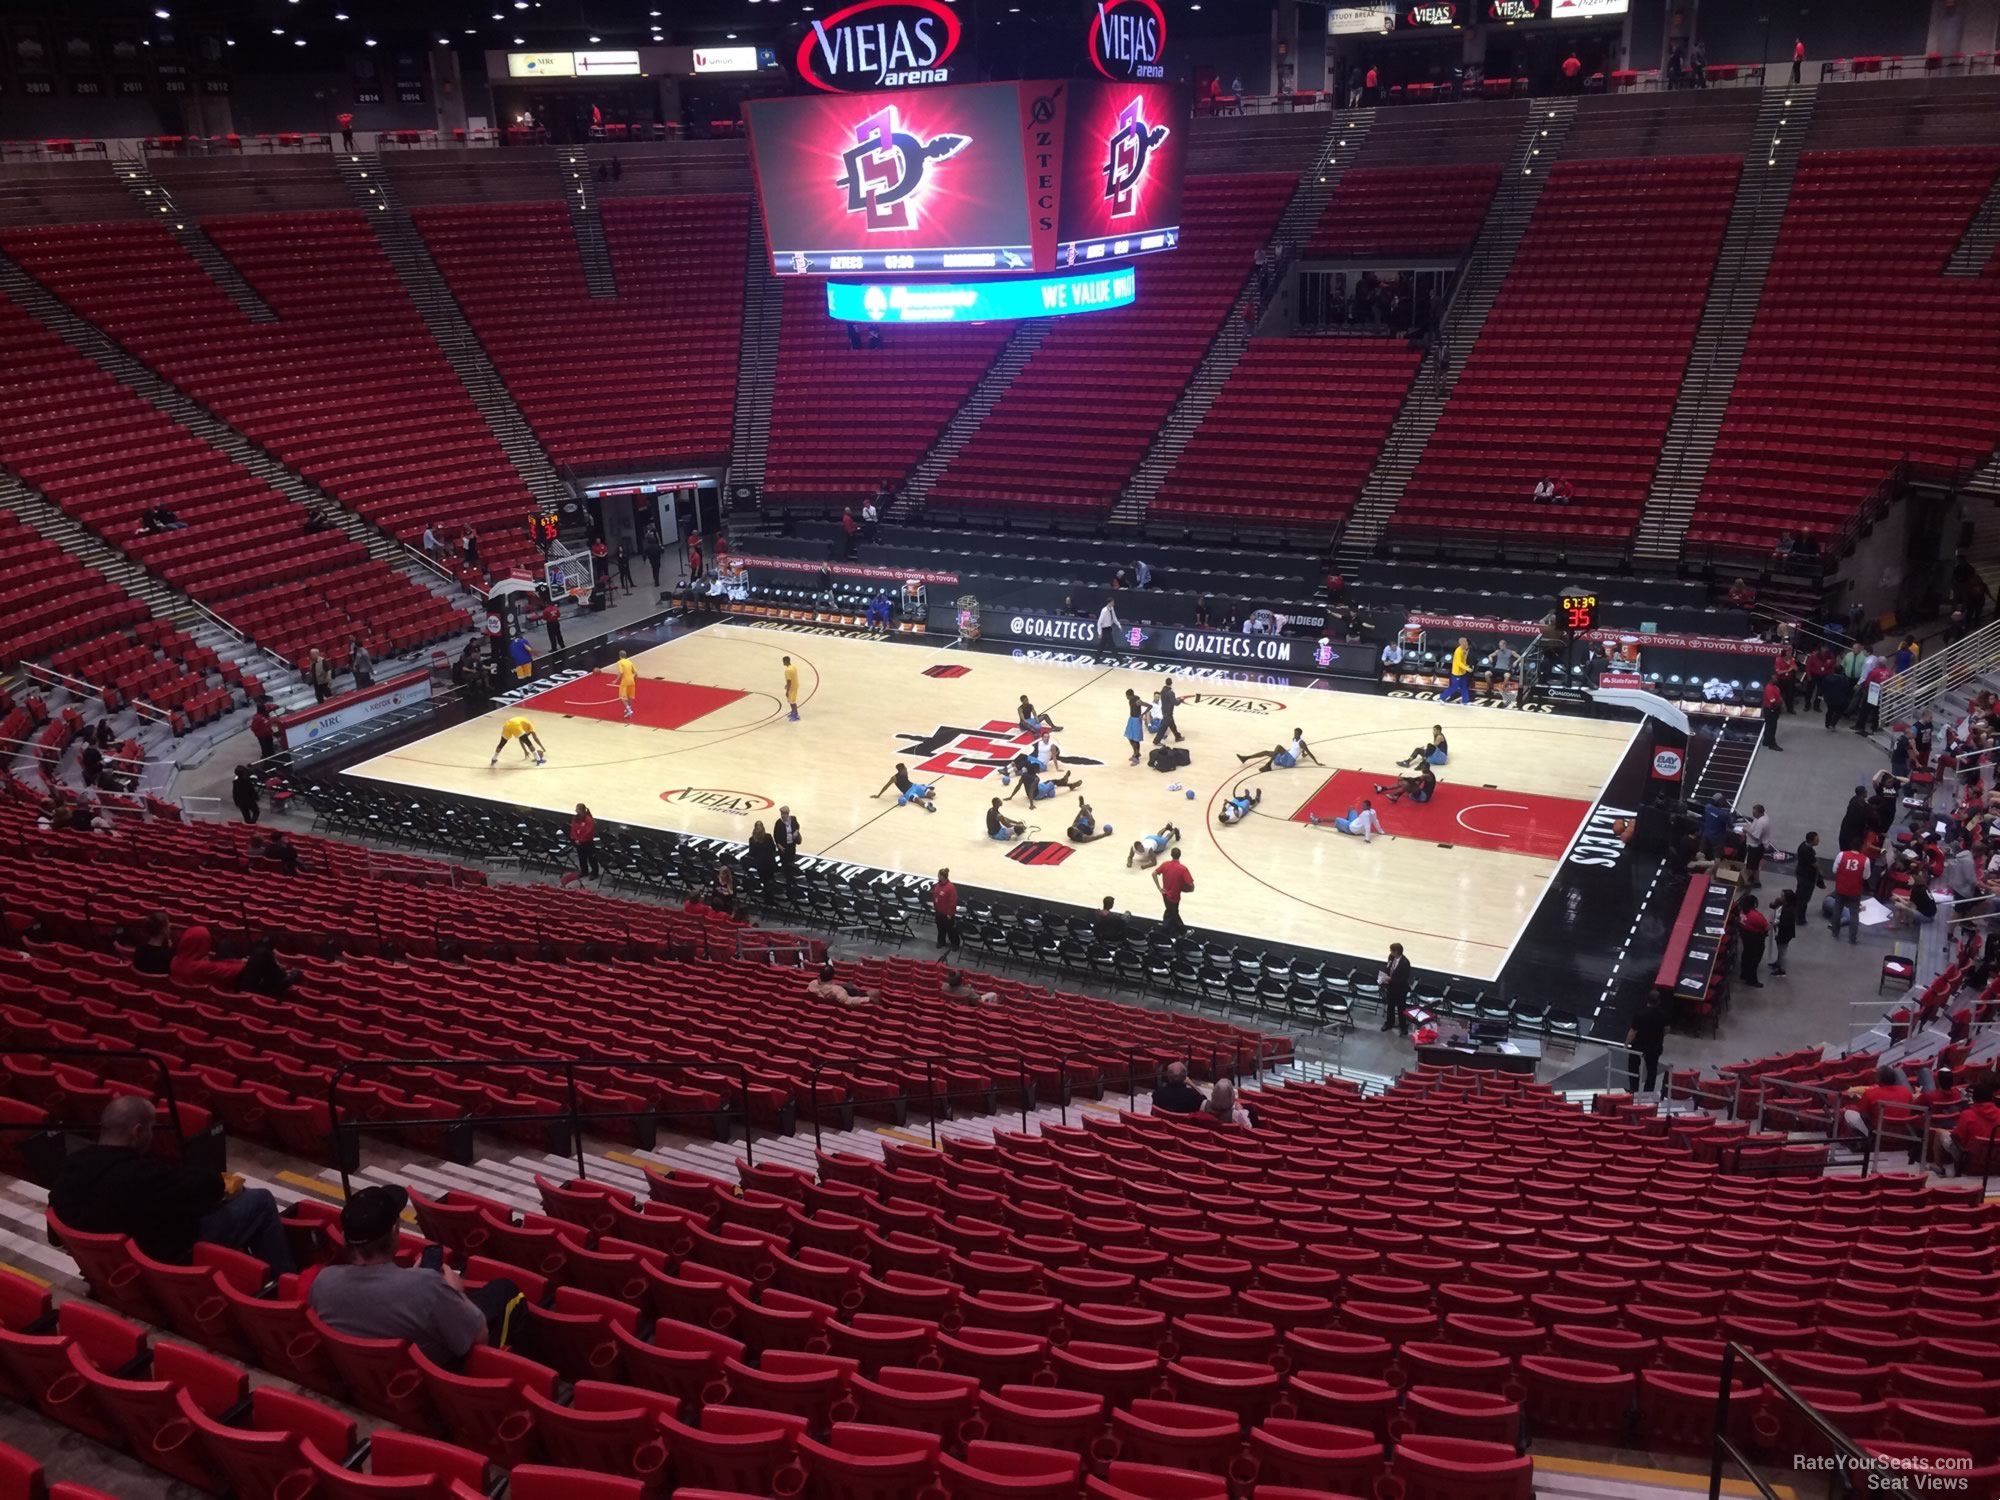 Section H at Viejas Arena 